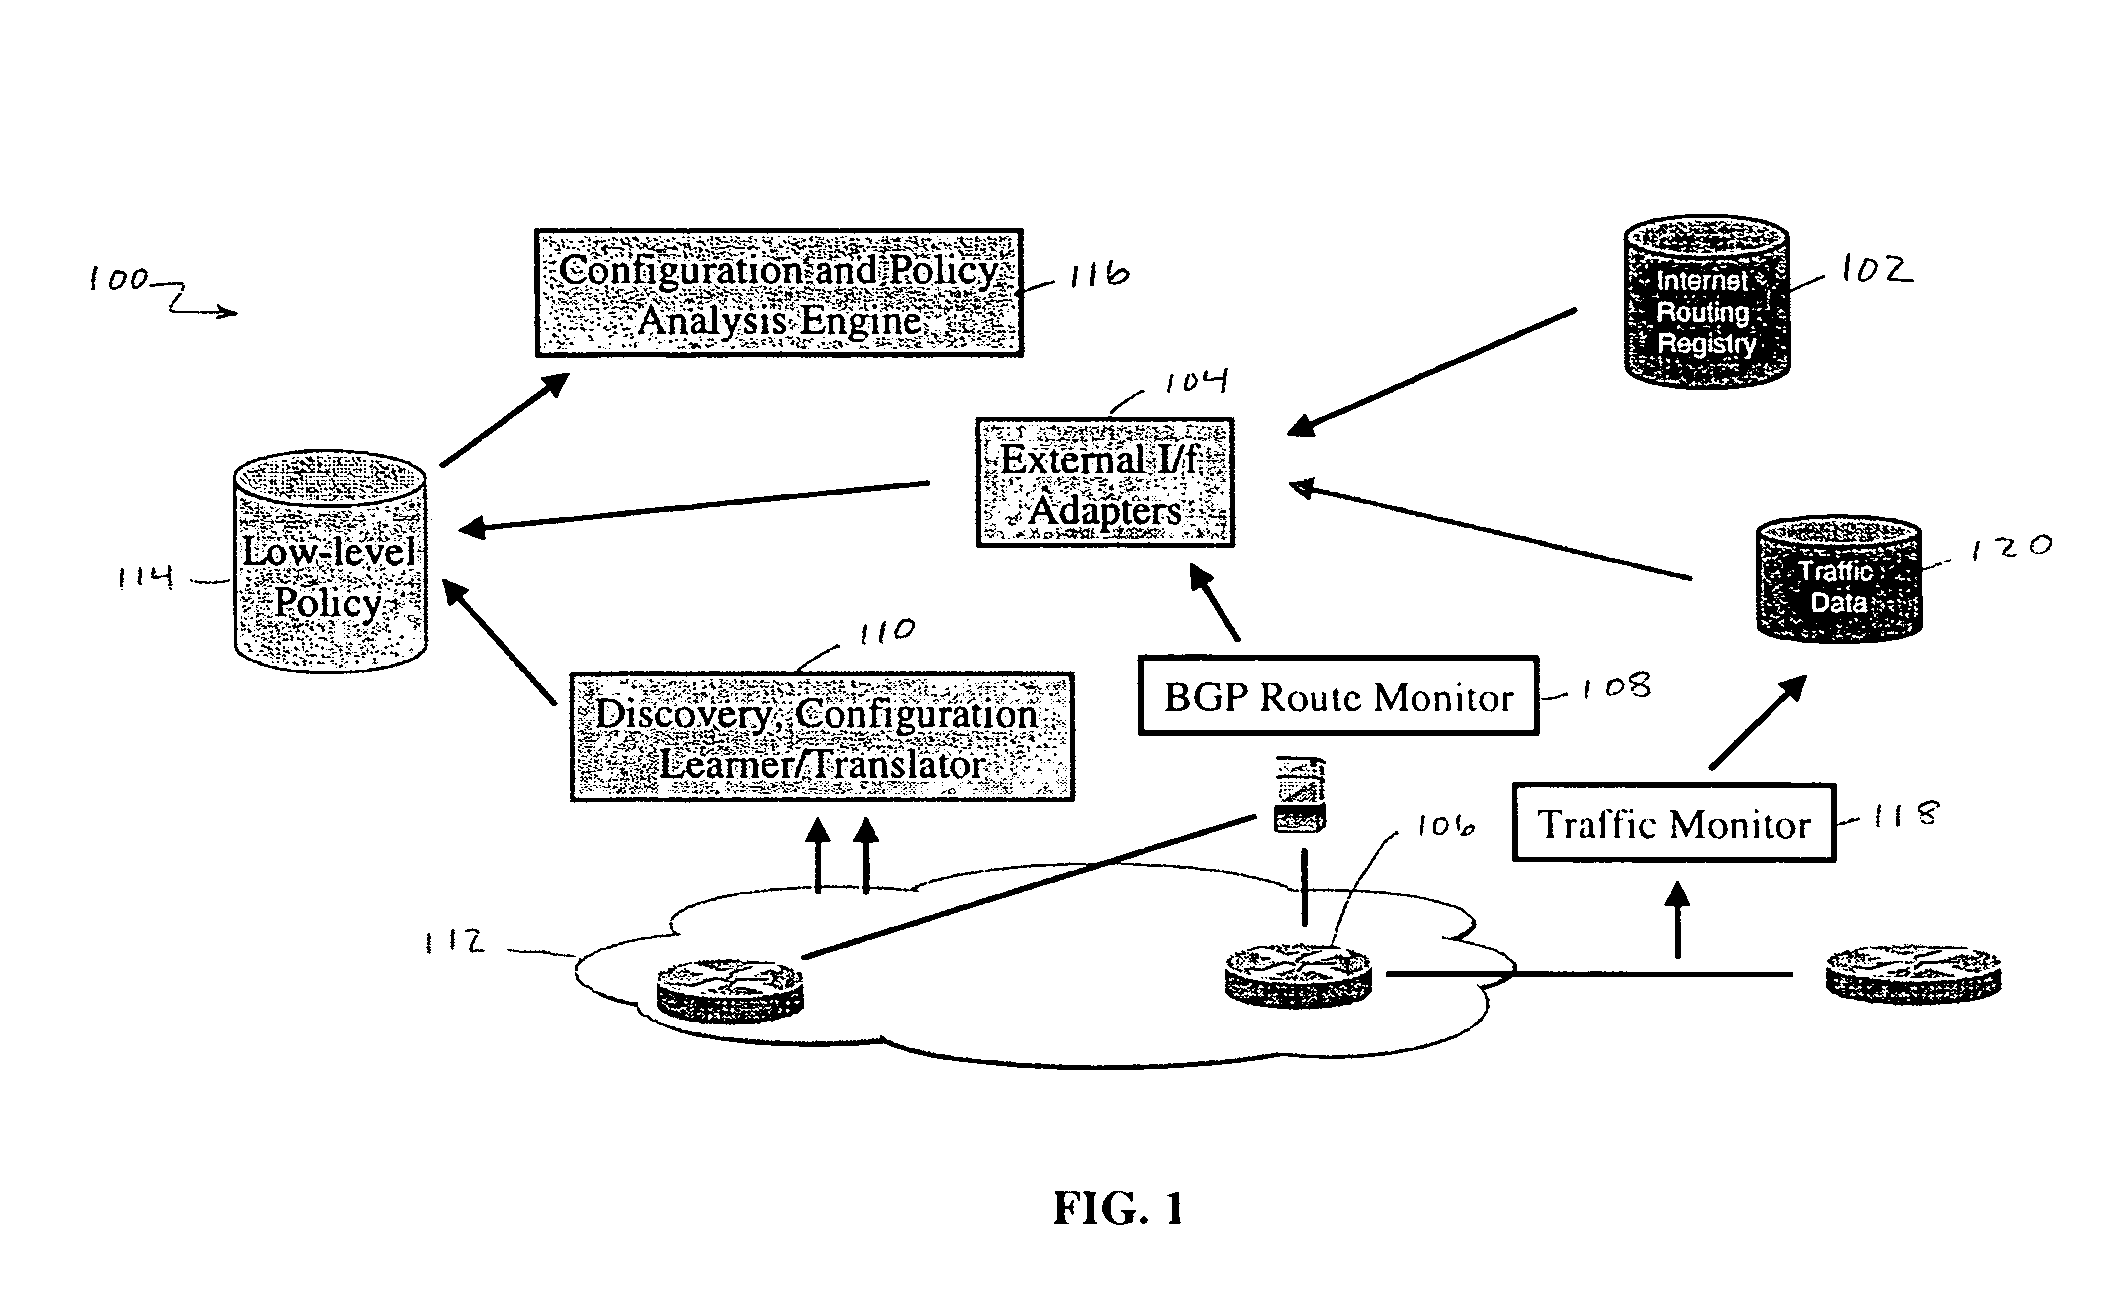 System and method for statistical analysis of border gateway protocol (BGP) configurations